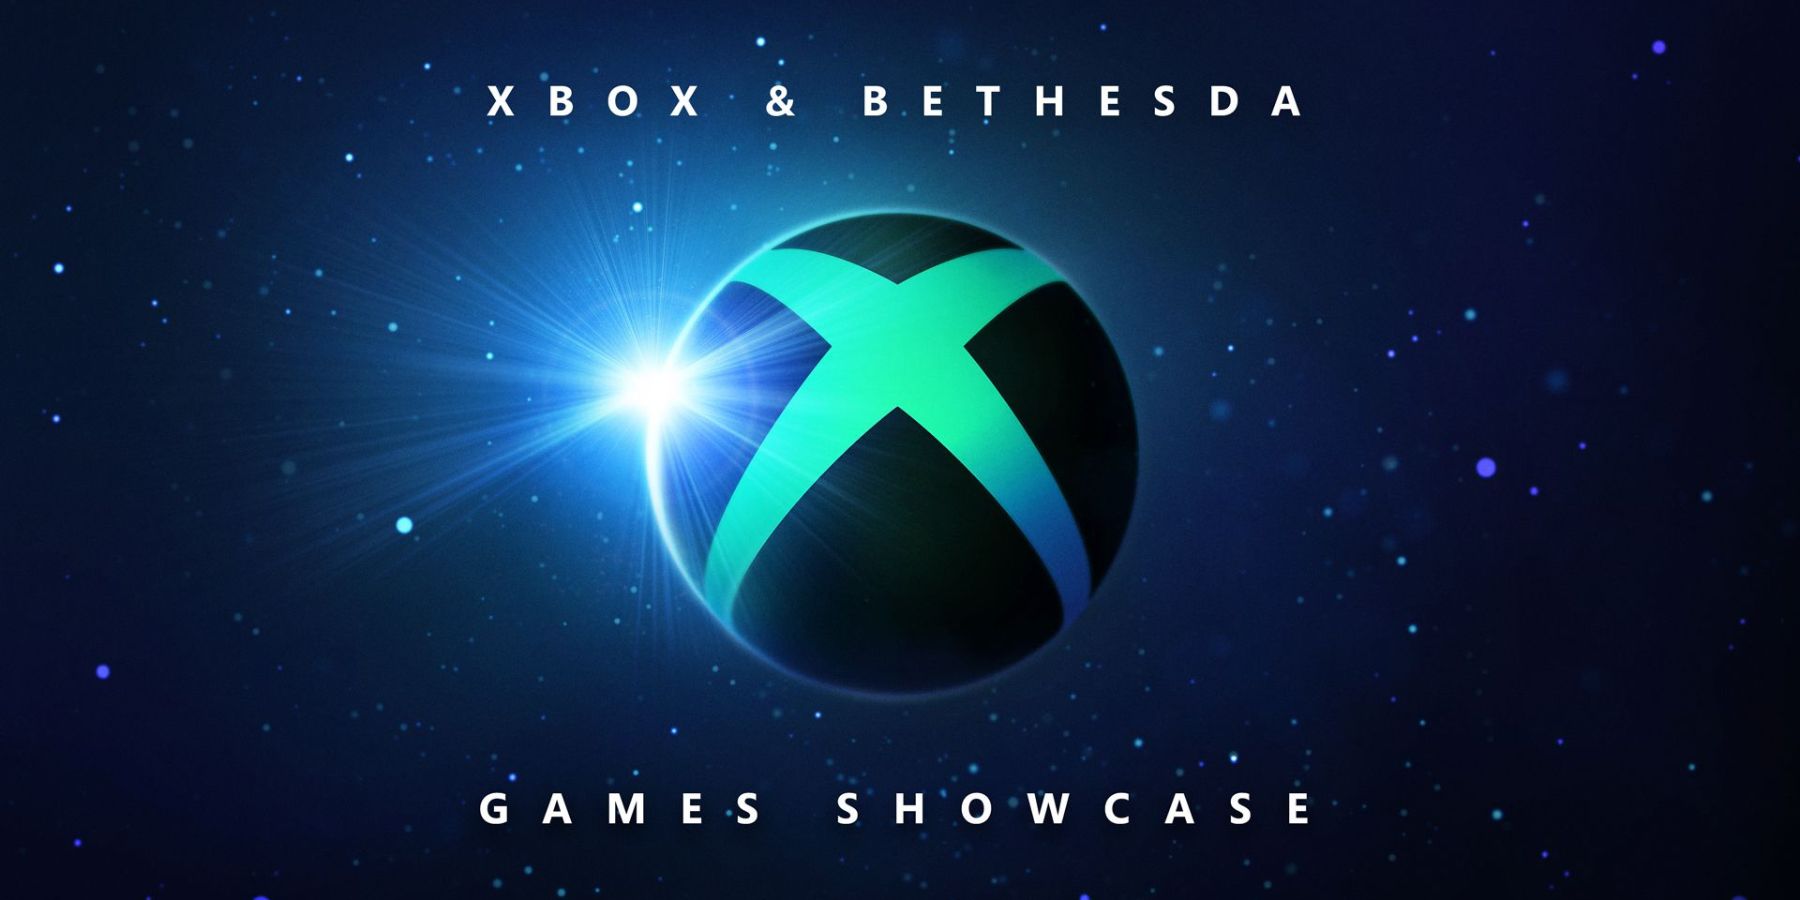 Microsoft's joint Xbox &amp; Bethesda Games Showcase is partnered with Summer Game Fest in 2022